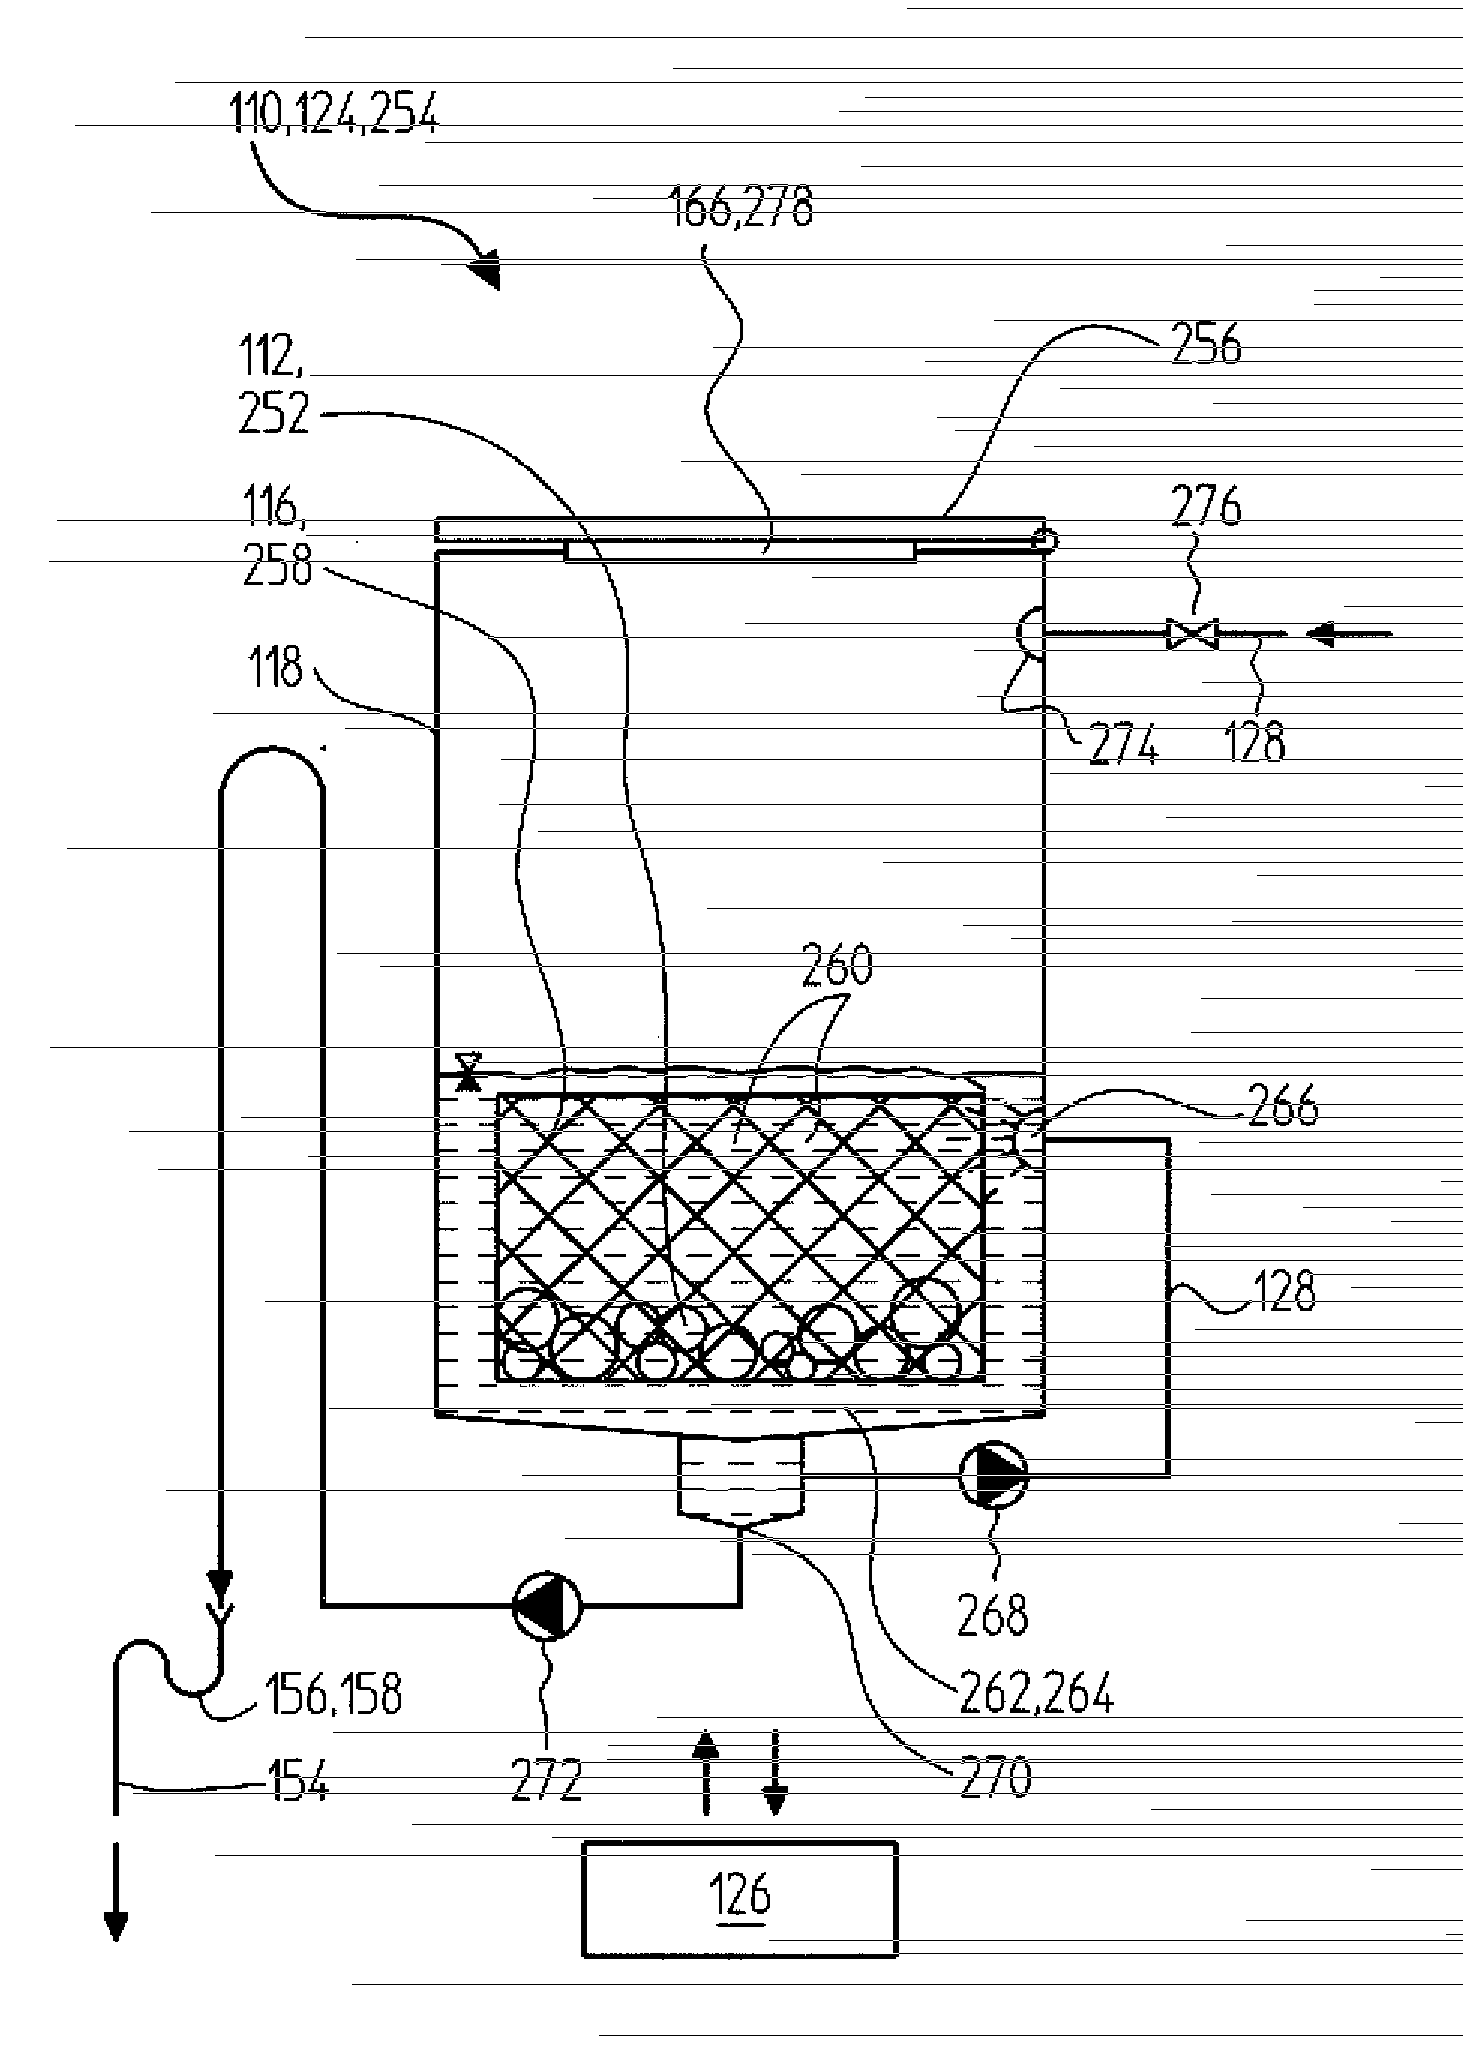 Cleaning apparatus for cleaning articles